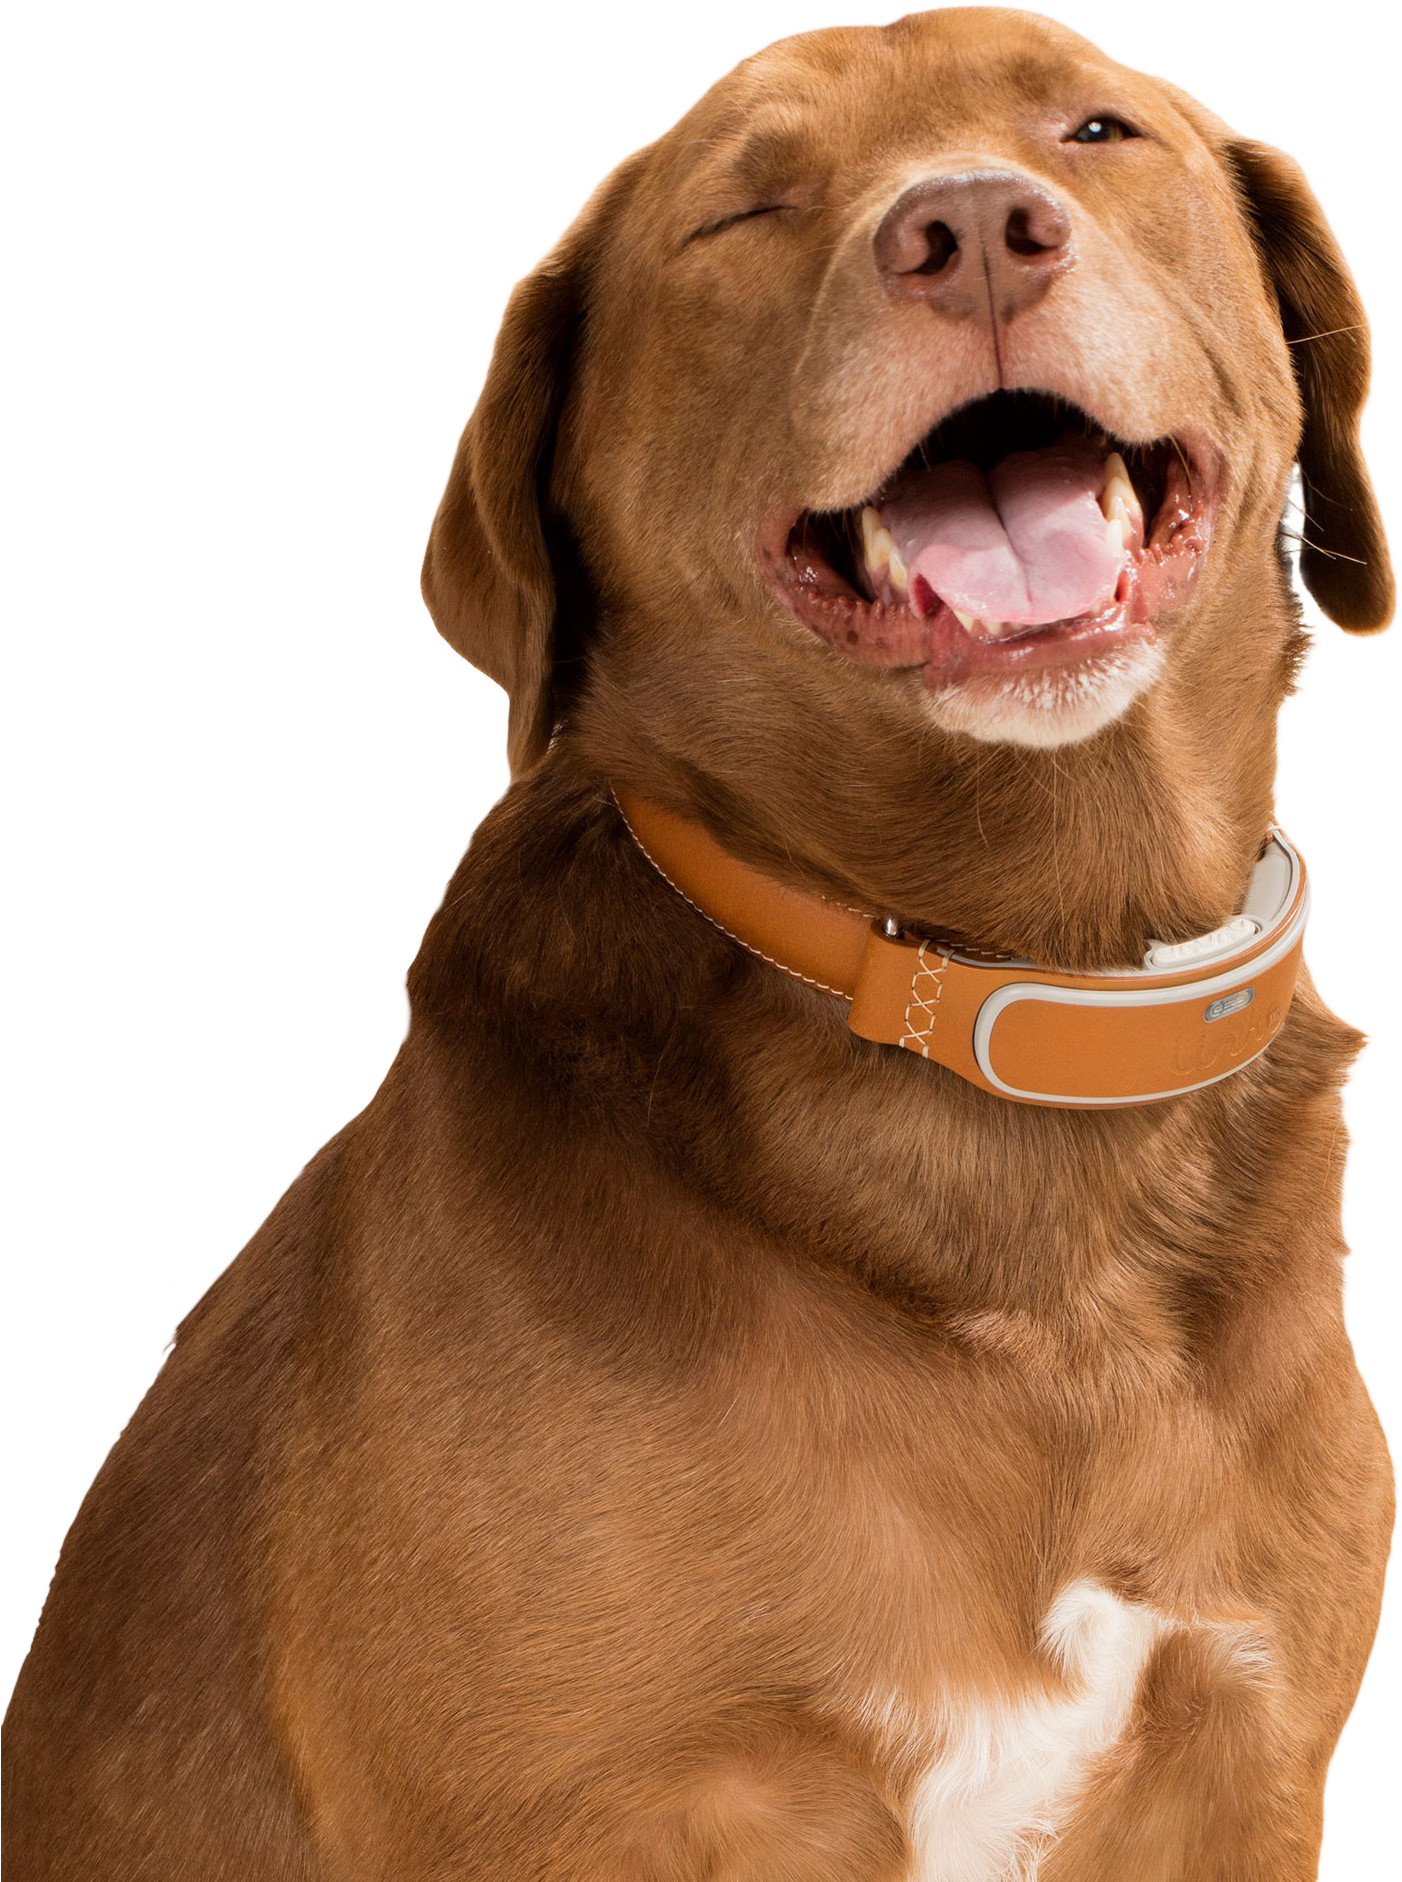 Happy April Fools Day Dog With Smart Collar